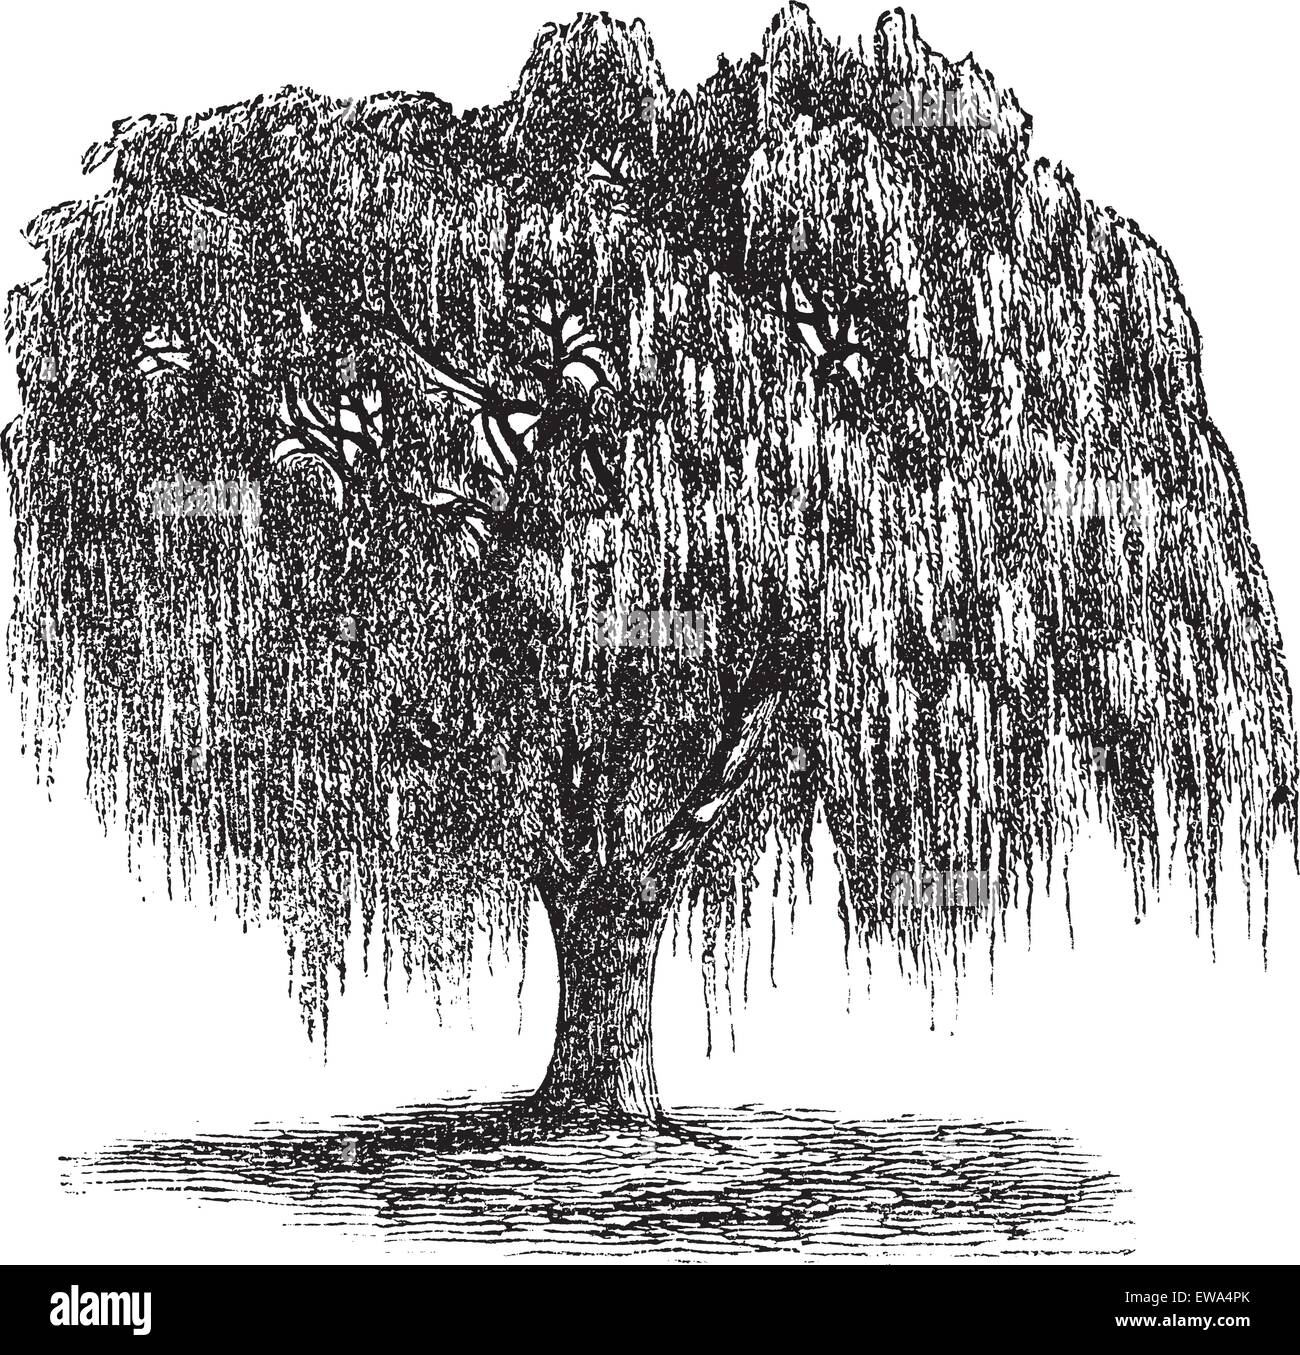 Babylon Willow or Salix babylonica or Peking Willow or Weeping willow, vintage engraving. Old engraved illustration of Babylon Willow tree. Stock Vector